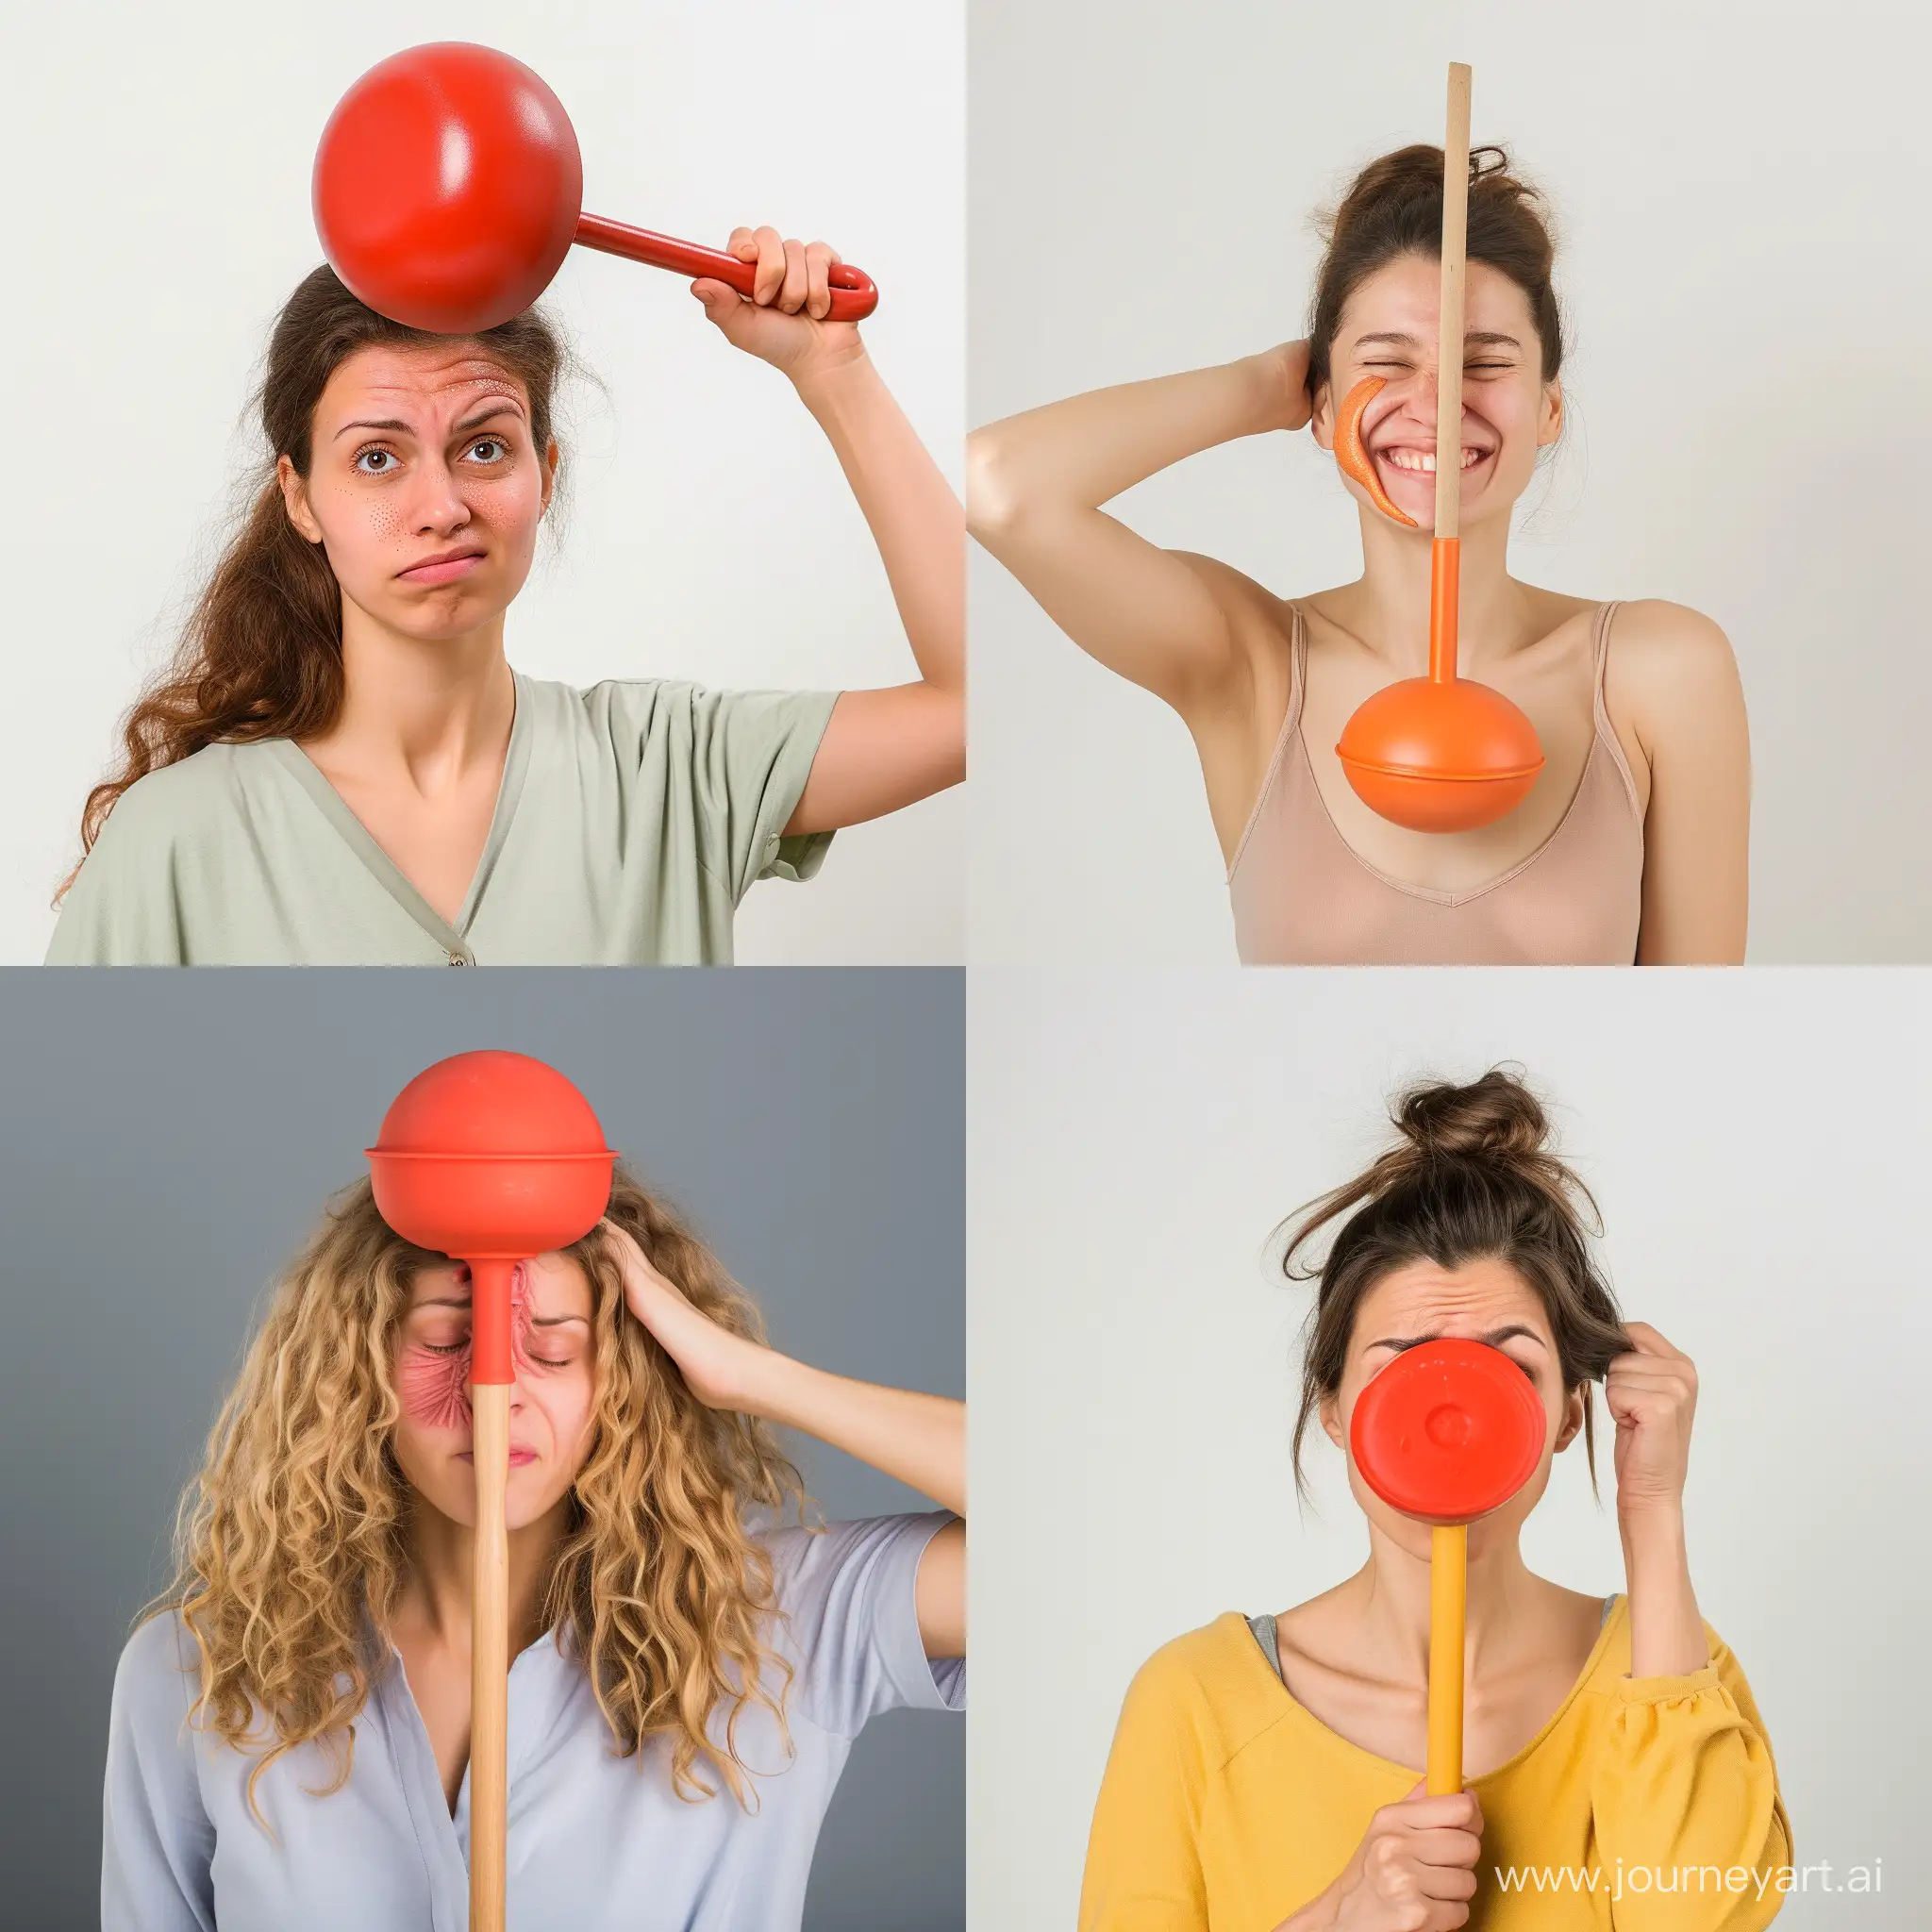 Woman-Playfully-Removing-Sink-Plunger-from-Face